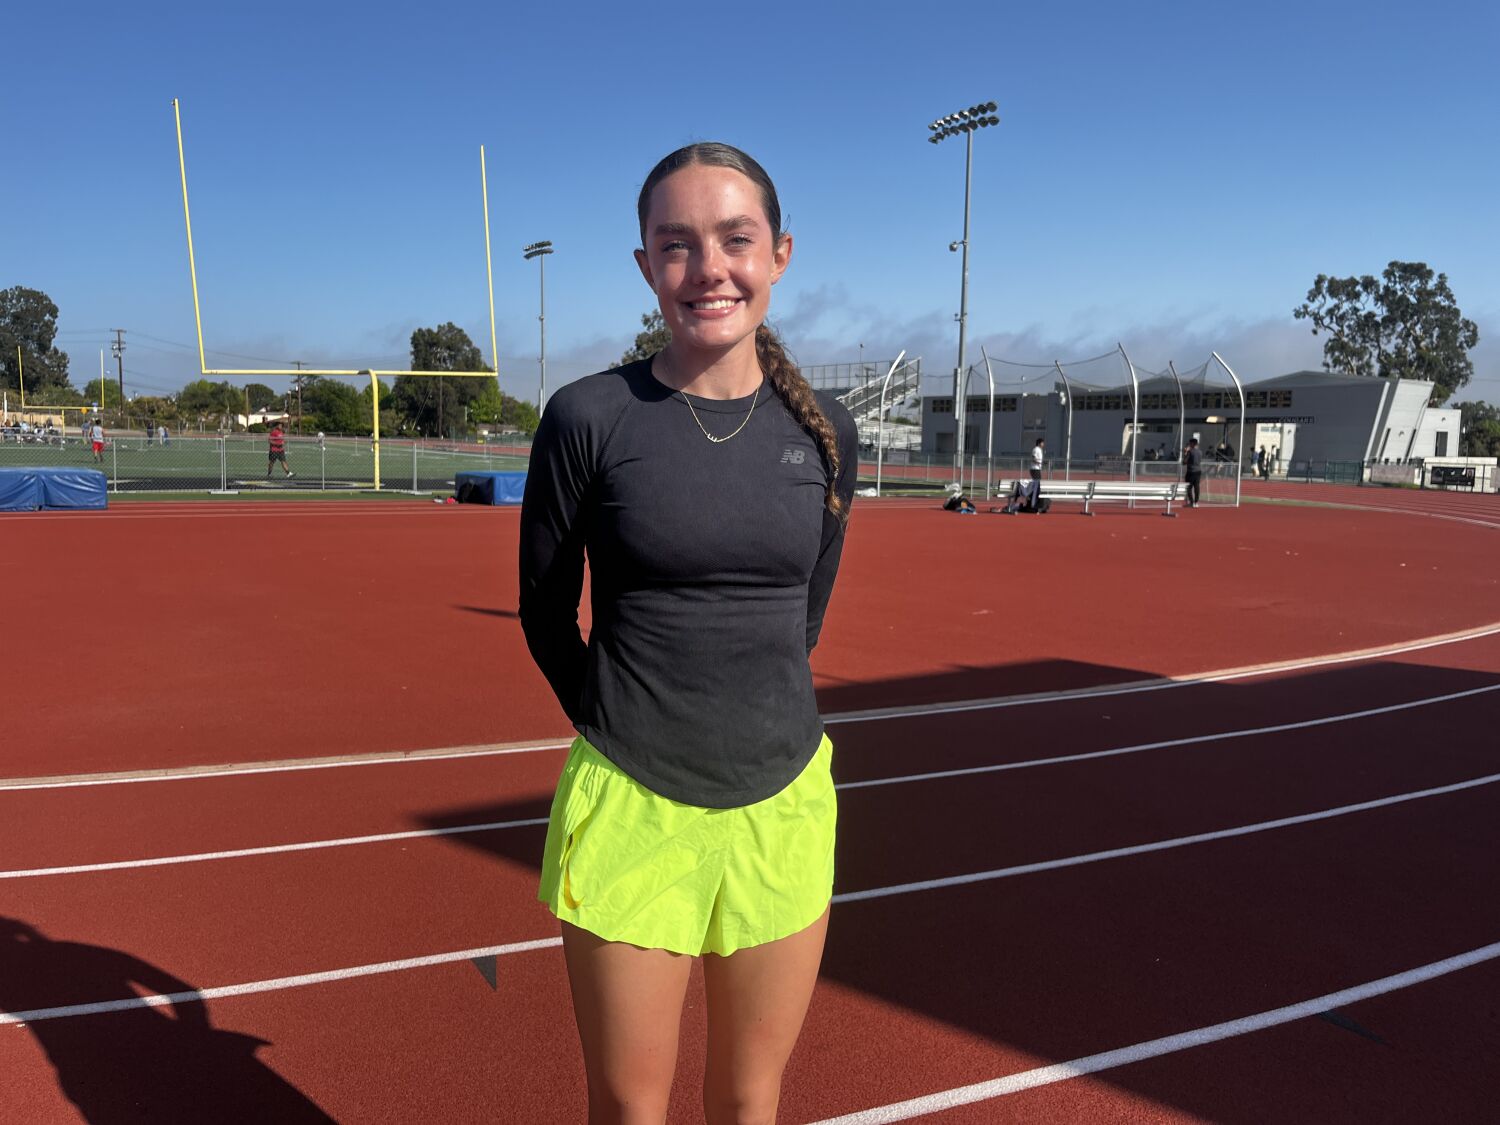 Ventura High track prodigy Sadie Engelhardt still pushes, even when only competition is herself